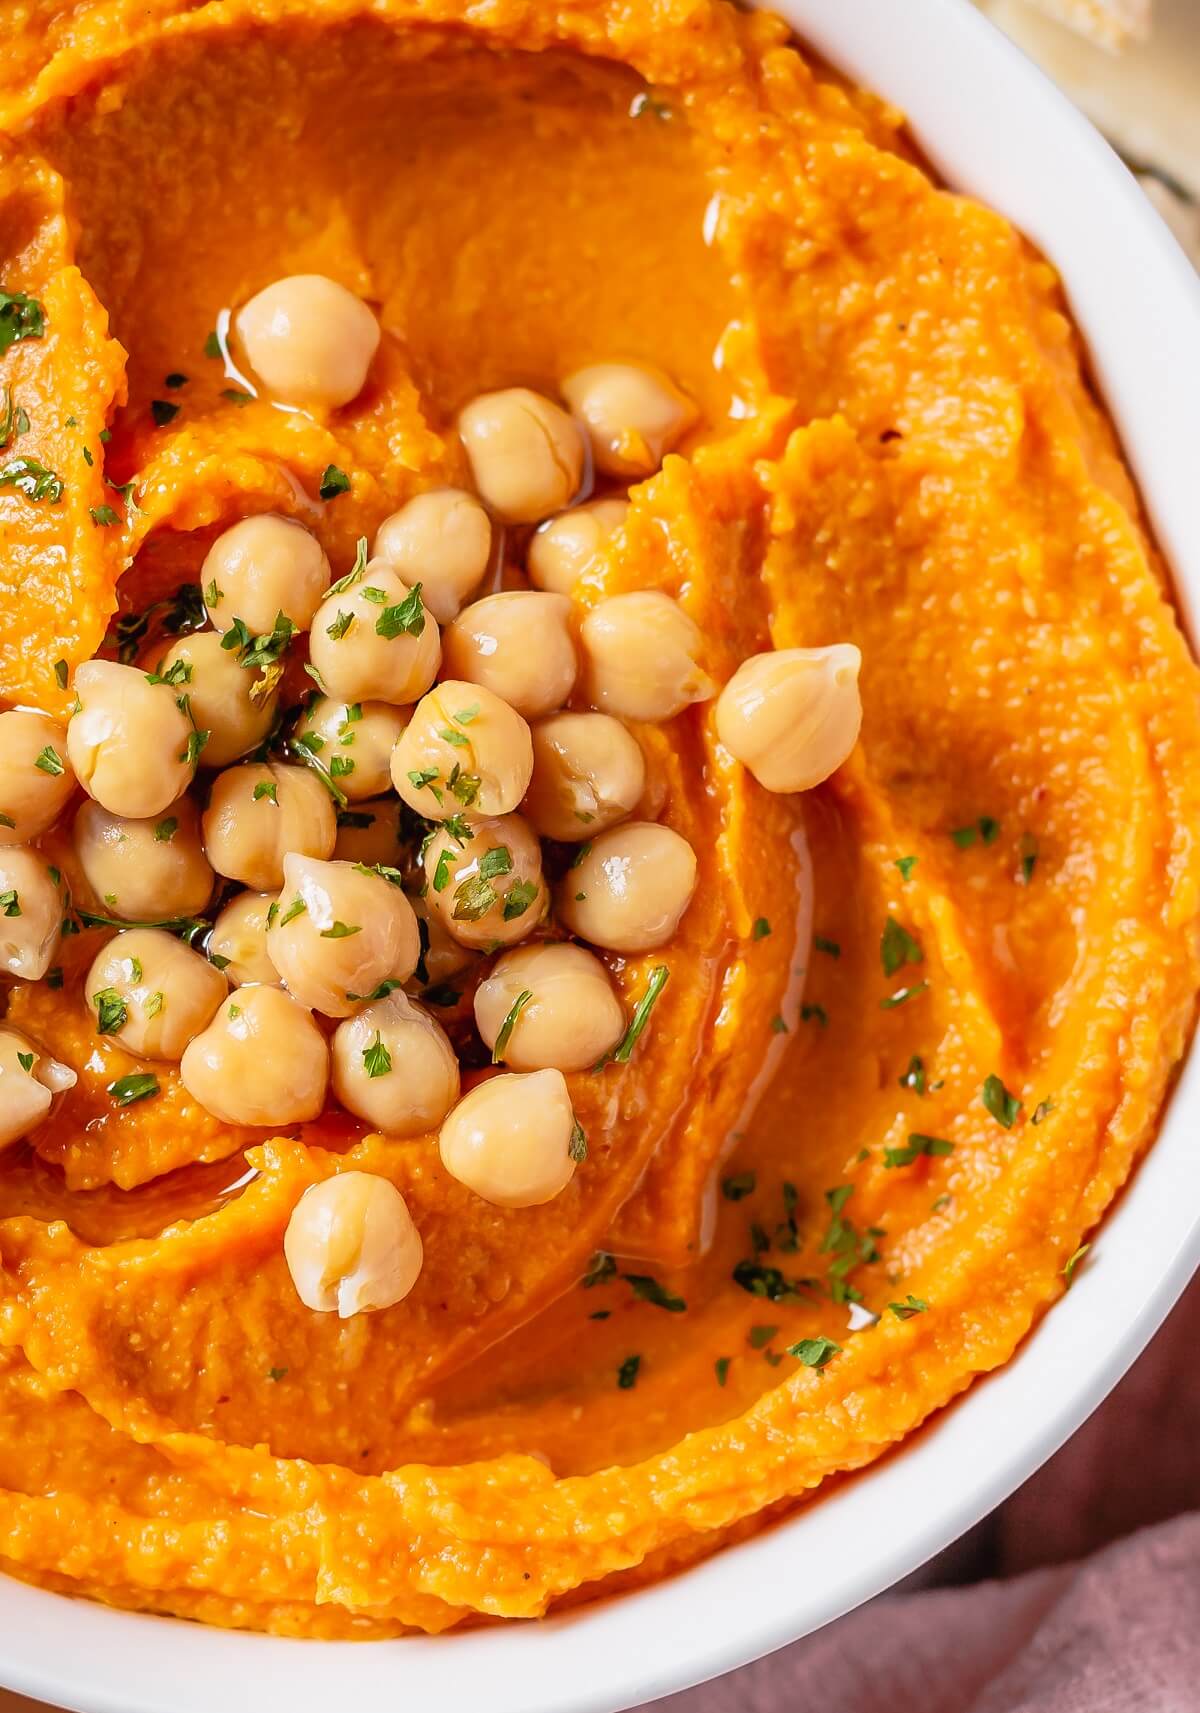 Close up of a bowl of pumpkin hummus garnished with chickpeas and olive oil.